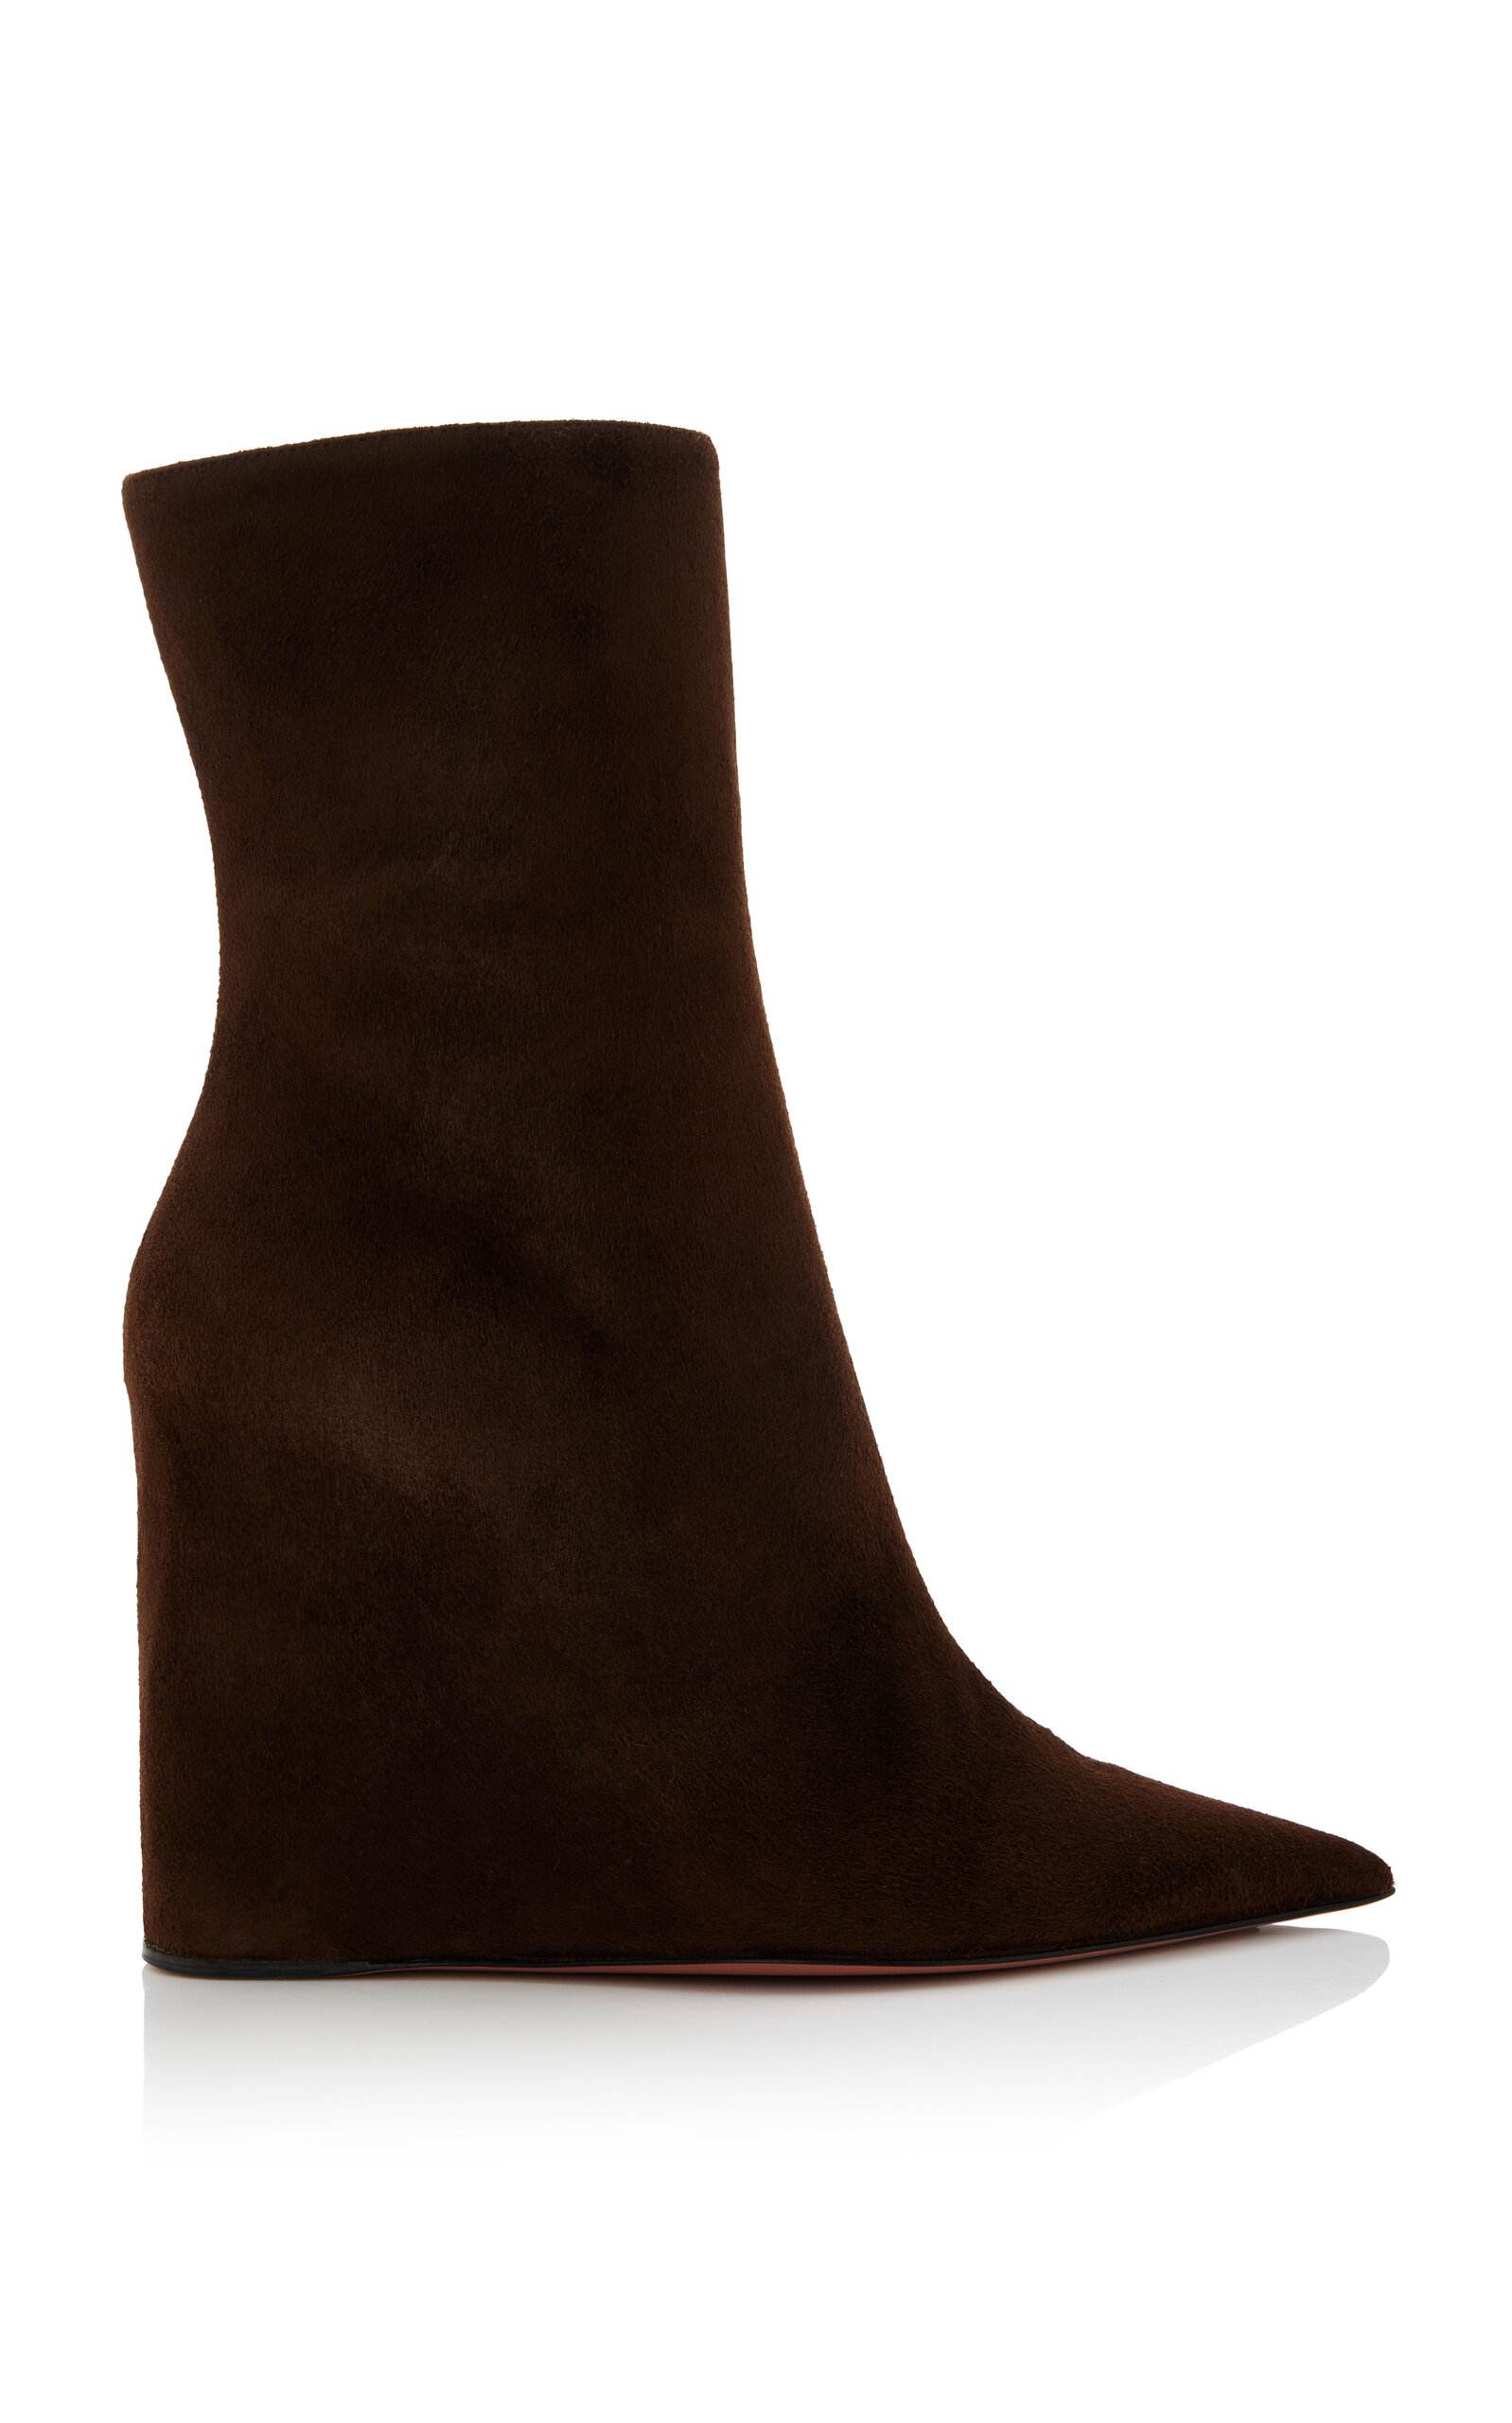 Amina Muaddi Pernille Suede Ankle Boots In Brown